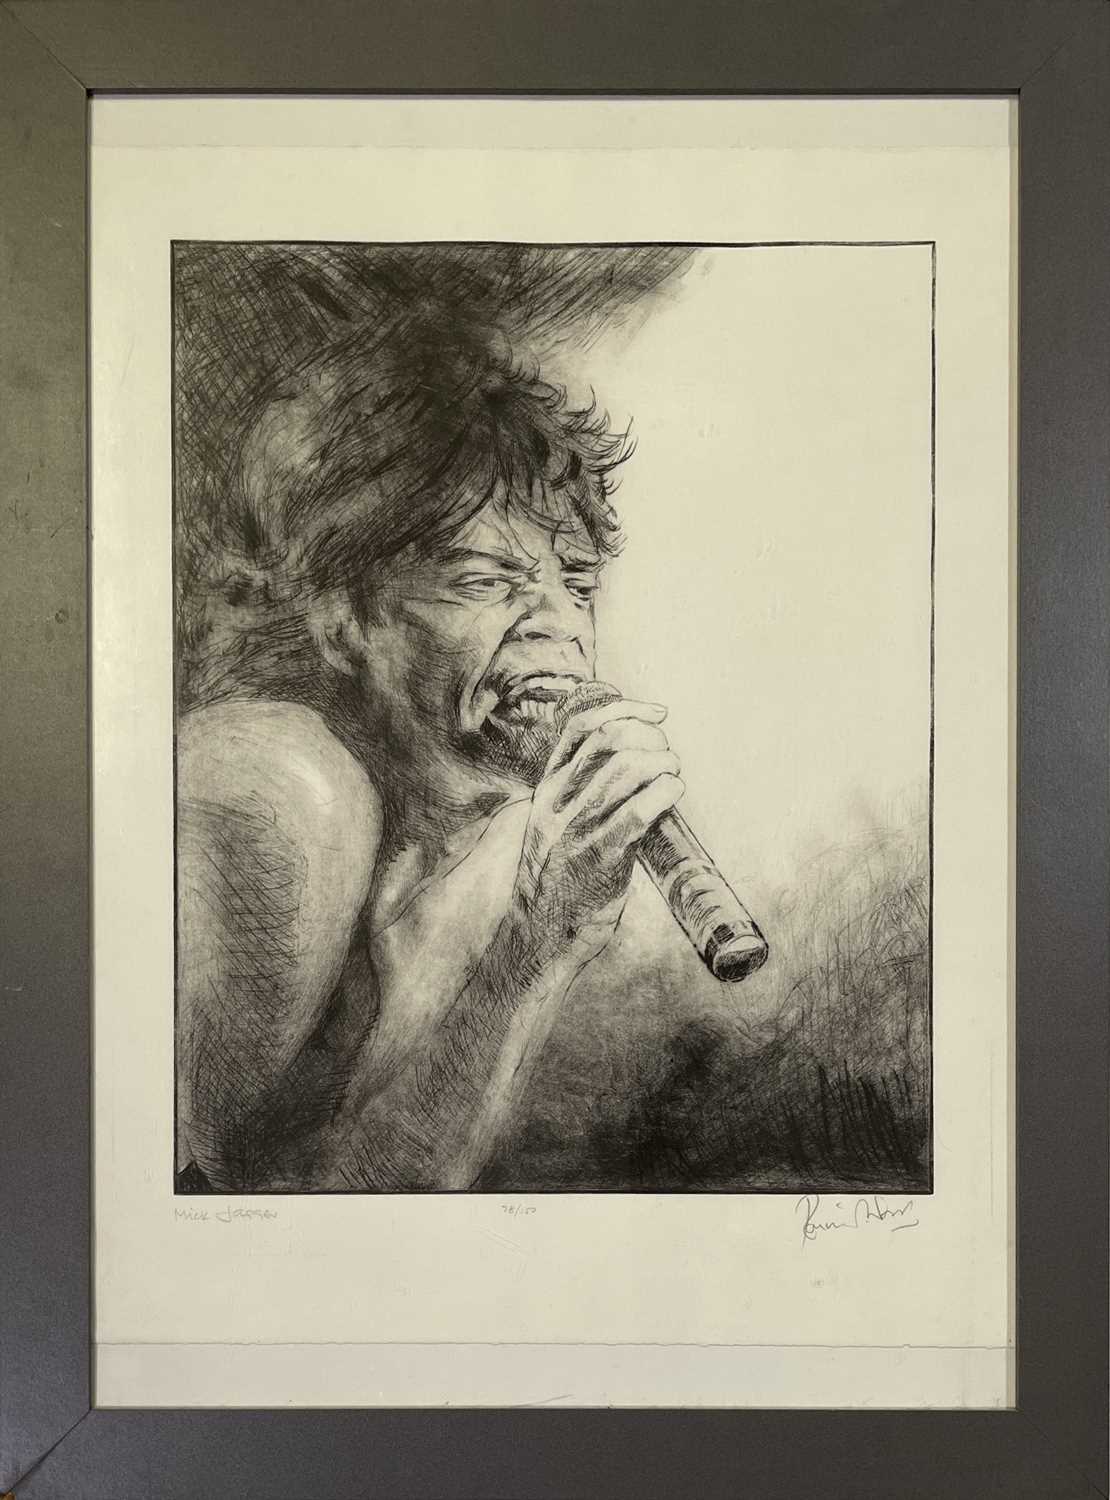 Lot 403 - THE ROLLING STONES - RONNIE WOOD - SIGNED LIMITED EDITION PRINT - MICK.